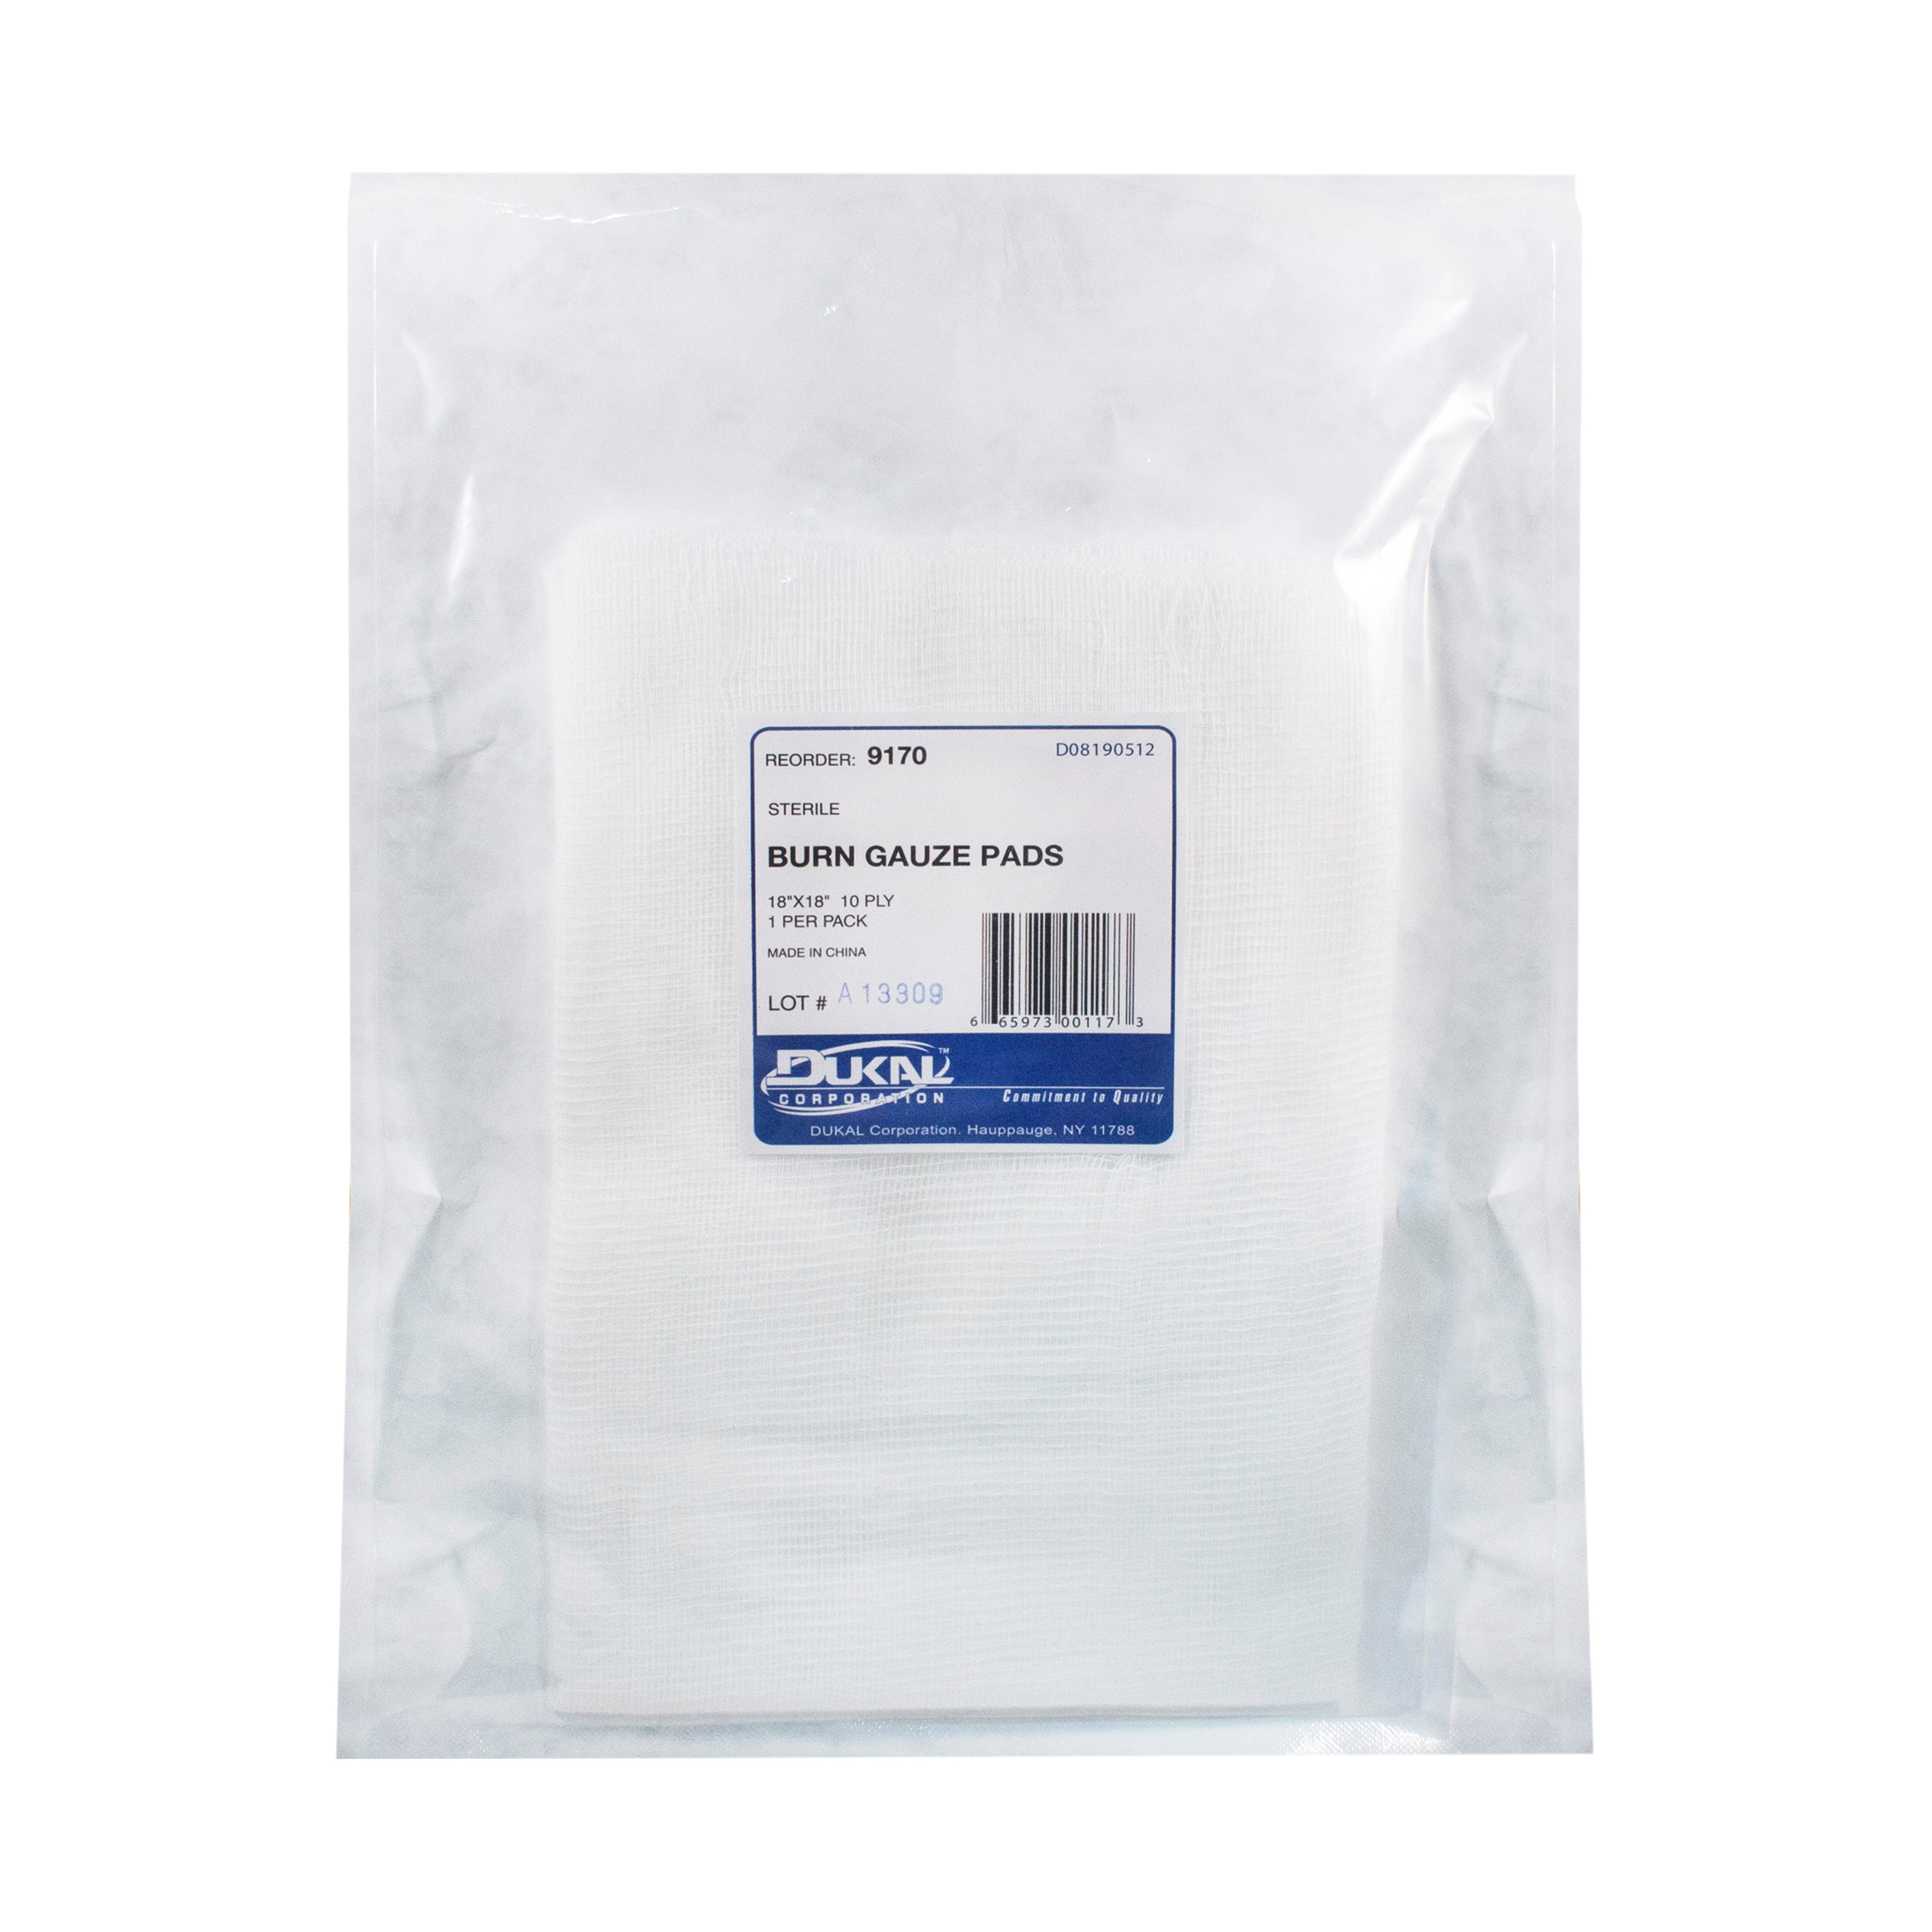 Burn Dressings Products, Supplies and Equipment